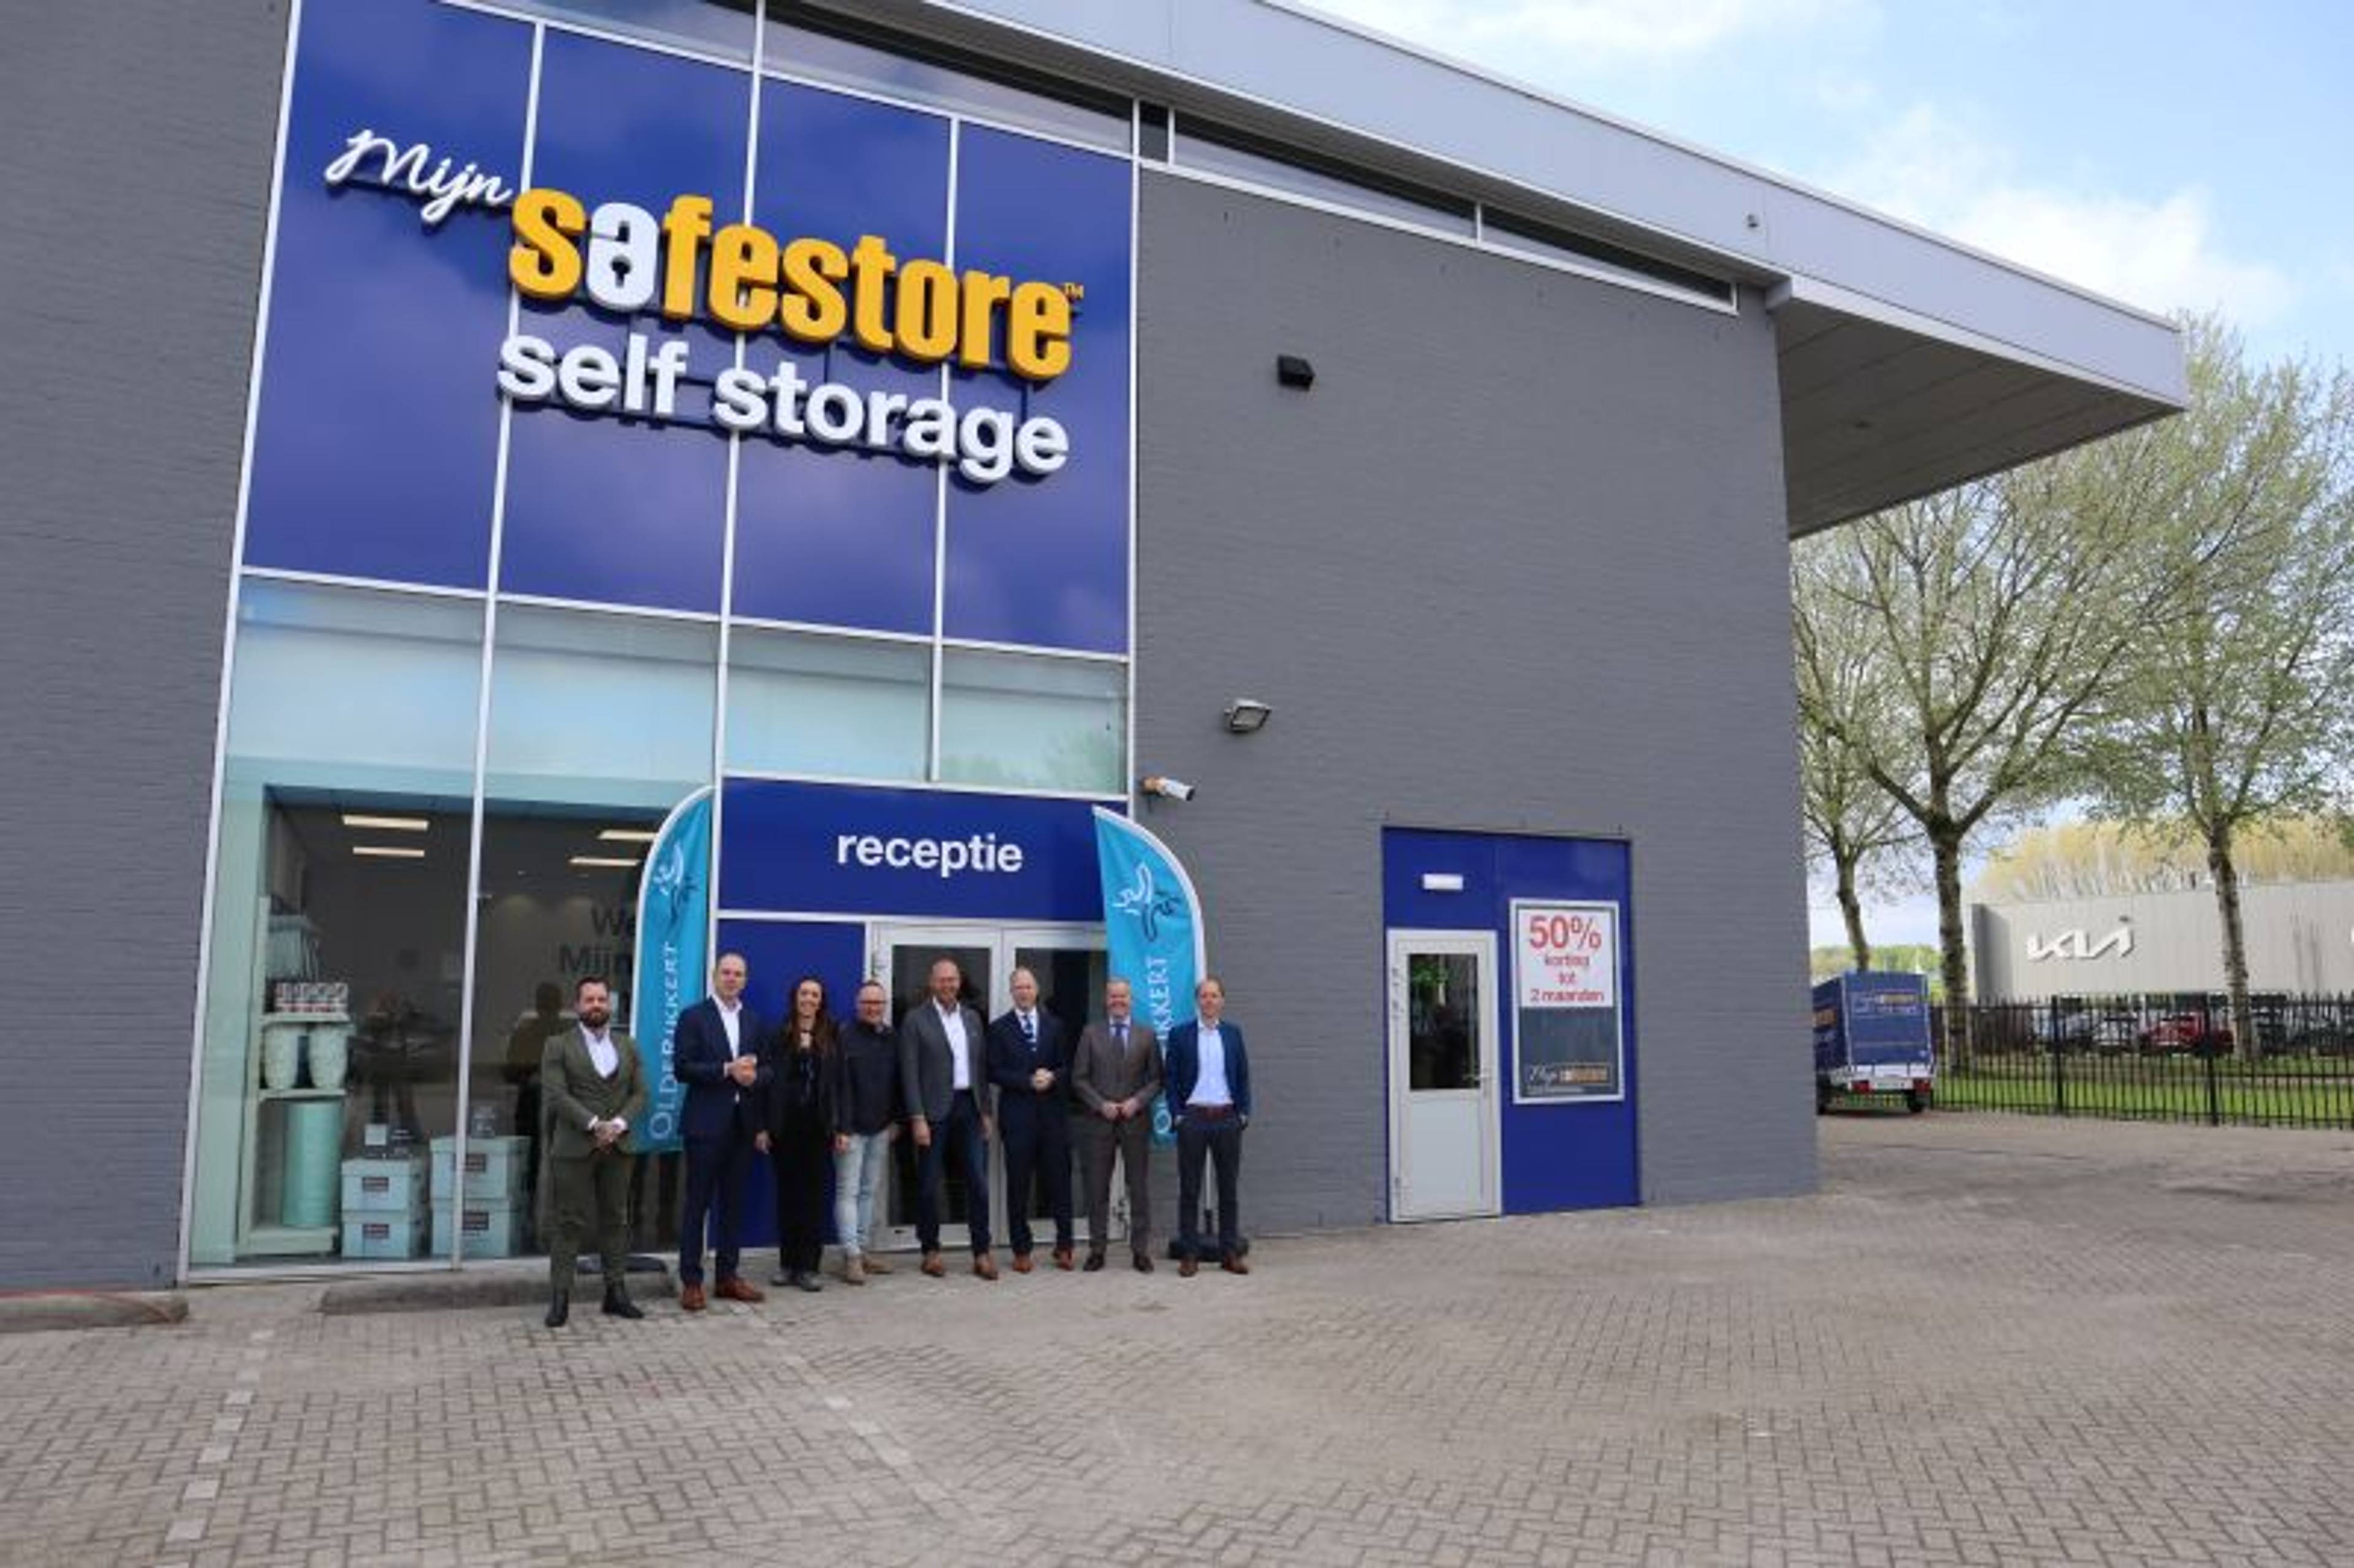 Outdoor view of safestore self storage facility